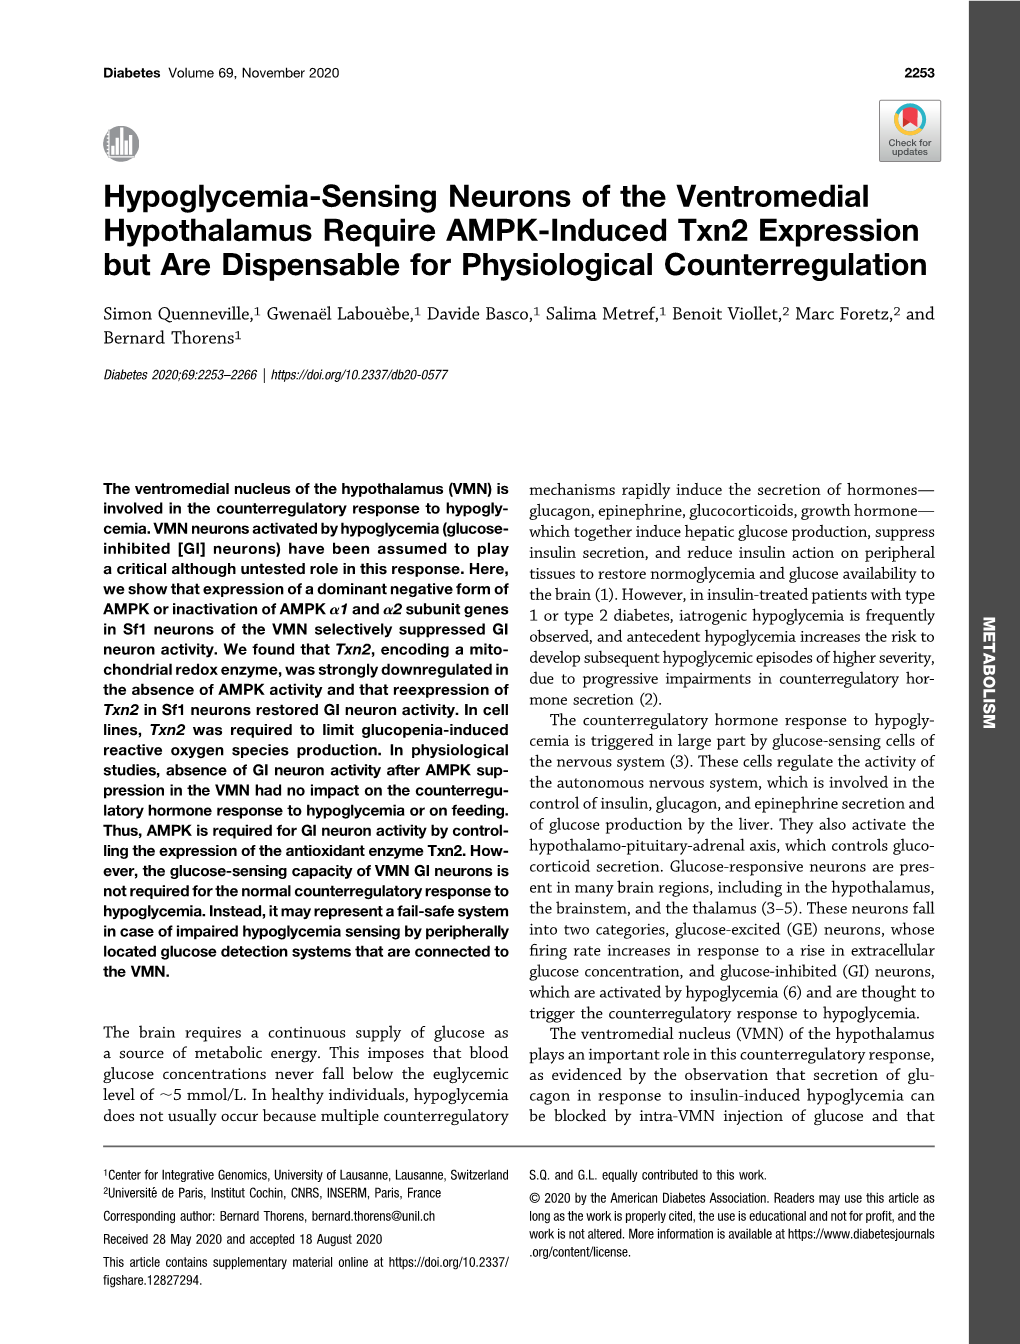 Hypoglycemia-Sensing Neurons of the Ventromedial Hypothalamus Require AMPK-Induced Txn2 Expression but Are Dispensable for Physiological Counterregulation